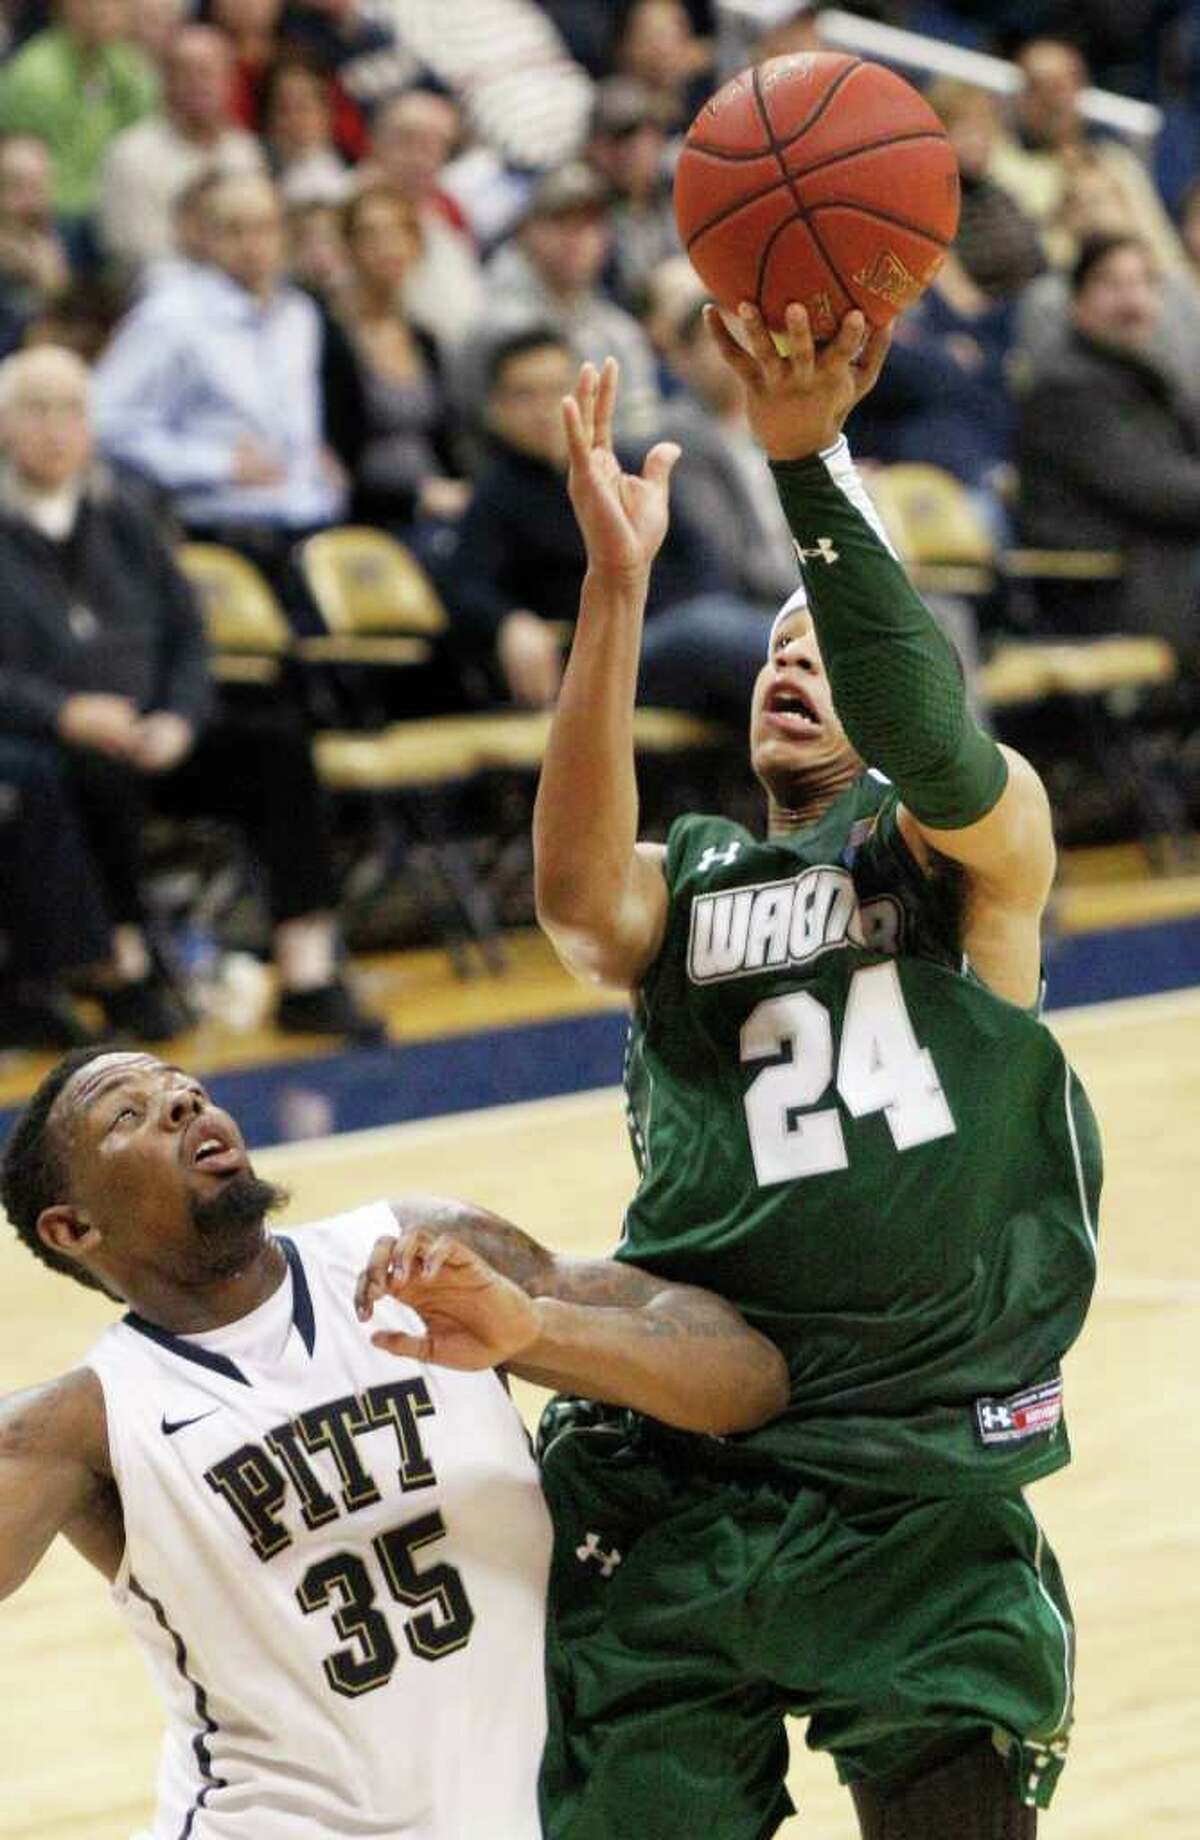 Wagner's Latif Rivers (24) goes over Pittsburgh's Nasir Robinson (35) to score in the second half of the NCAA college basketball game on Friday, Dec. 23, 2011, in Pittsburgh. Wagner upset Pittsburgh 59-54. (AP Photo/Keith Srakocic)